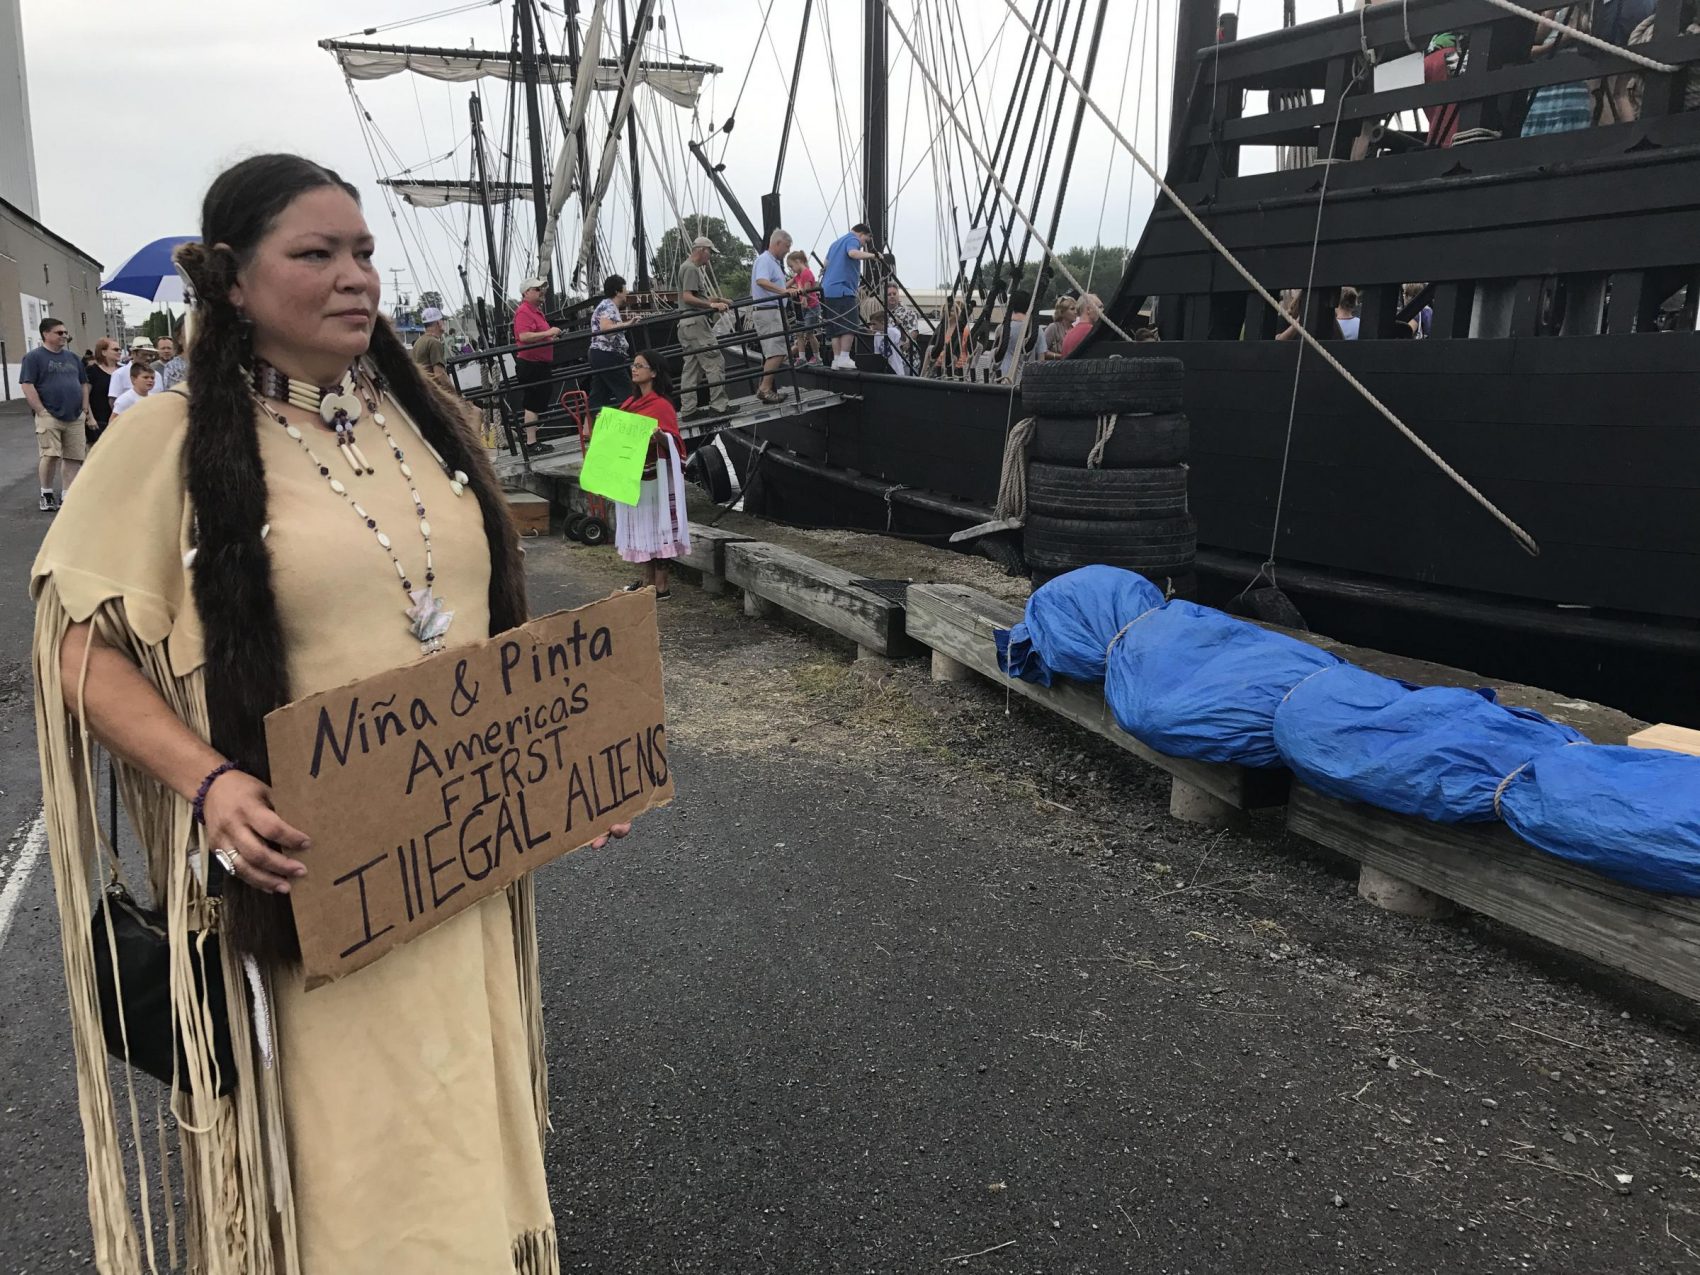 Renee Roman Ose, a descendent of the Oklahoma Cheyenne, came to the Oswego Harbor Saturday to protest the two Christopher Columbus ships and educate people on about the genocide and terror it brought to the original inhabitants of the Americas. (Payne Horning/WRVO)